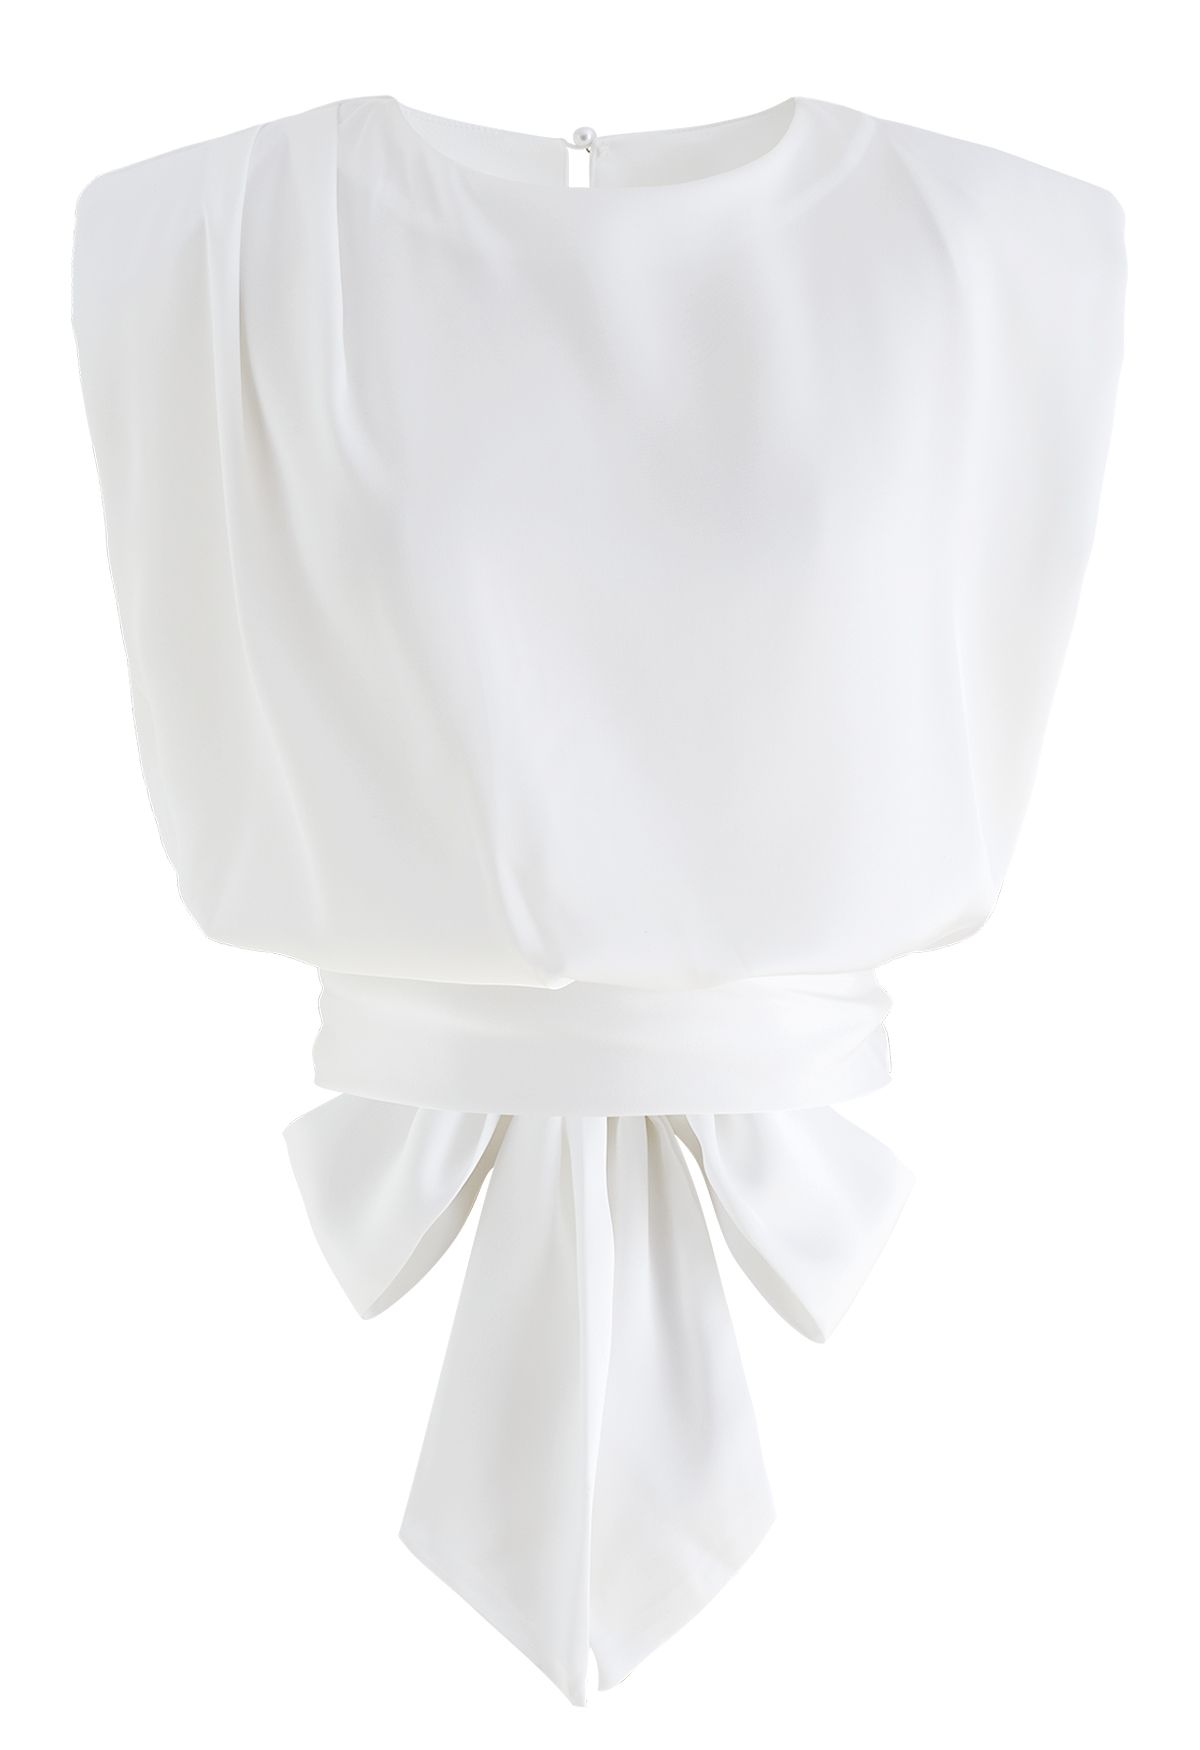 Satin Tie Back Sleeveless Top in White - Retro, Indie and Unique Fashion